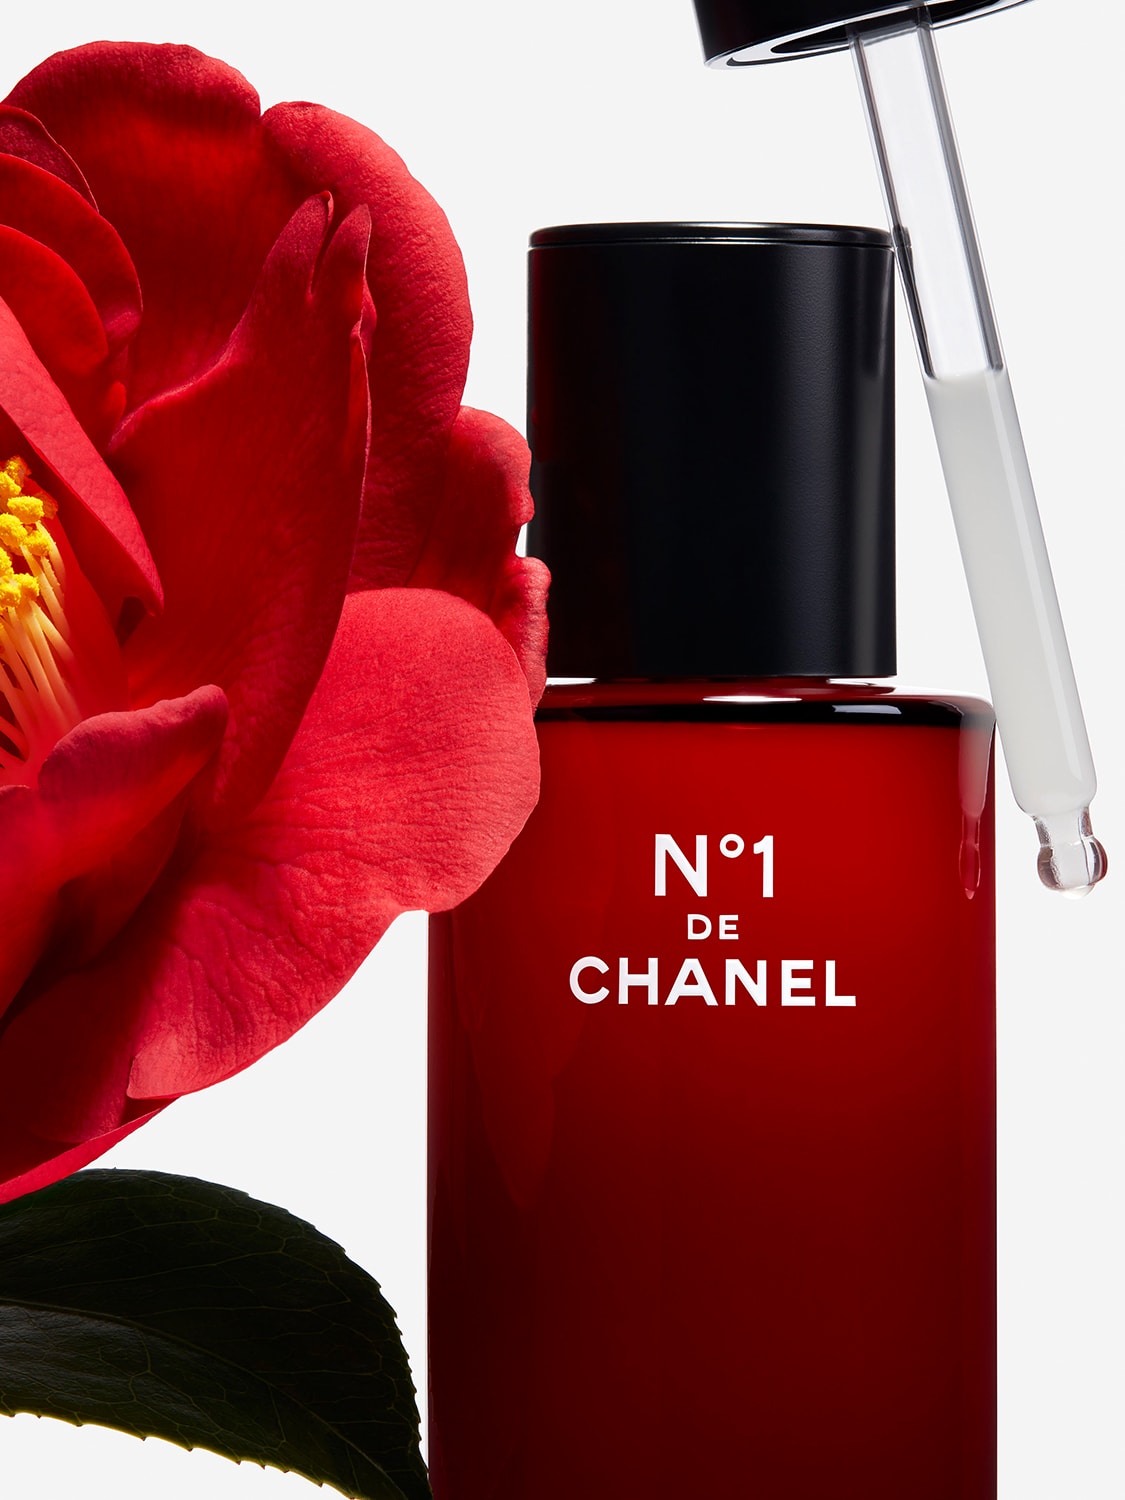 What does Gabrielle Chanel's favourite camellia flower have to do